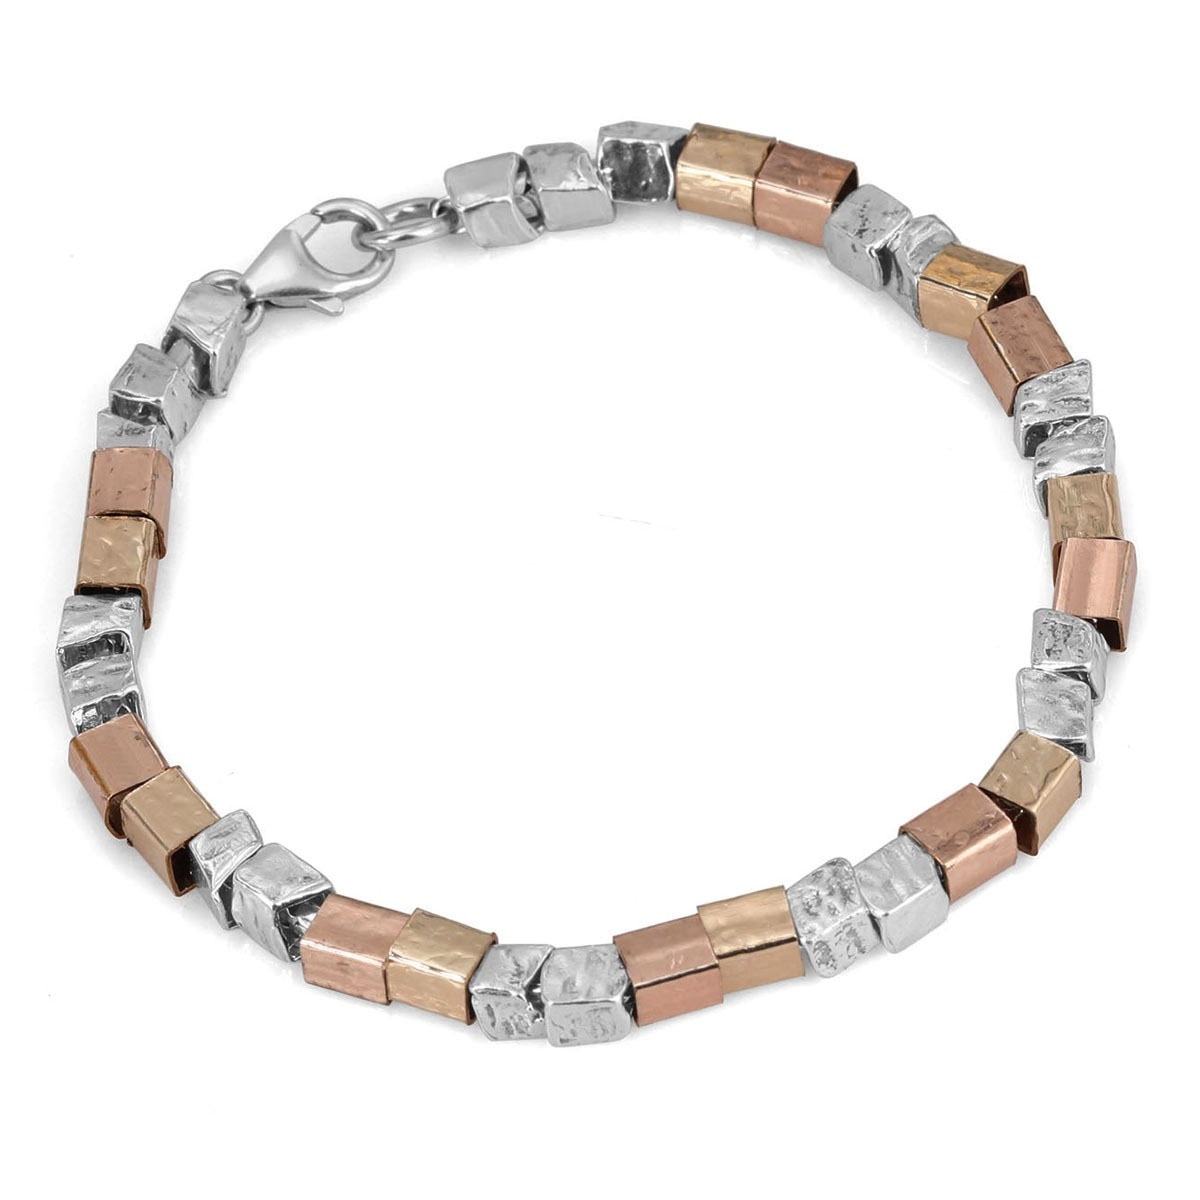 Moriah Jewelry Square Beads 925 Sterling Silver and Gold-Filled Bracelet  - 1